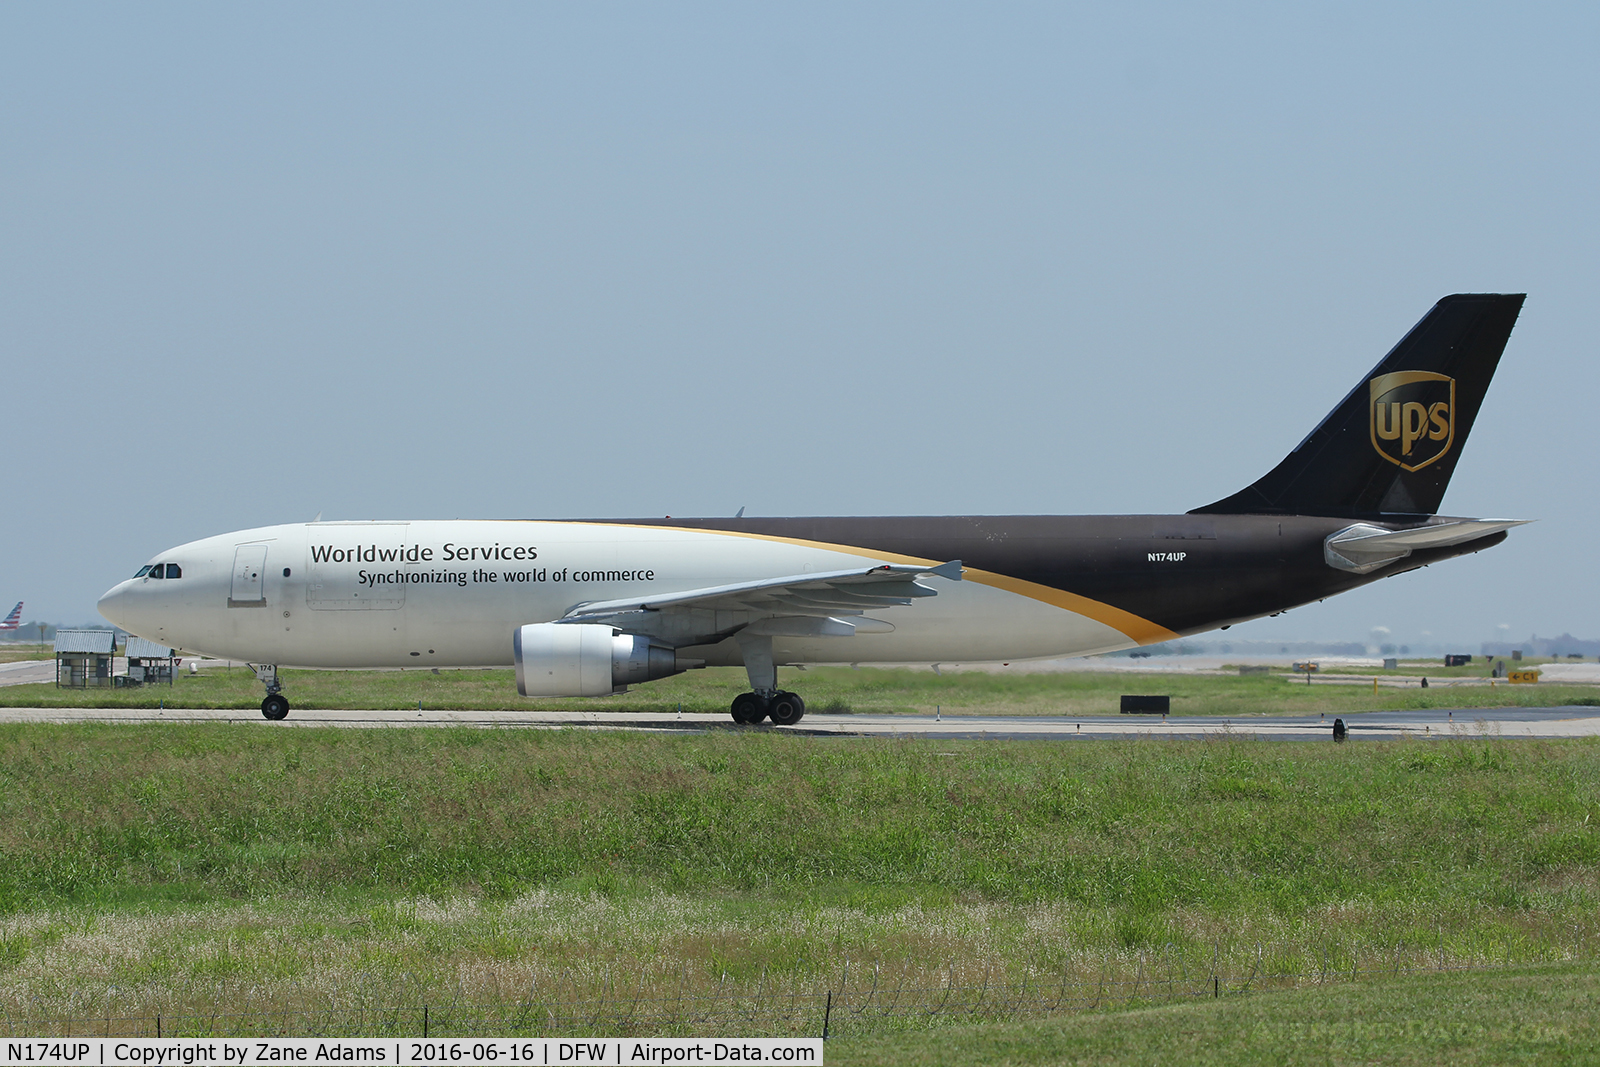 N174UP, 2006 Airbus A300F4-622R C/N 0869, Departing the UPS ramp at DFW Airport